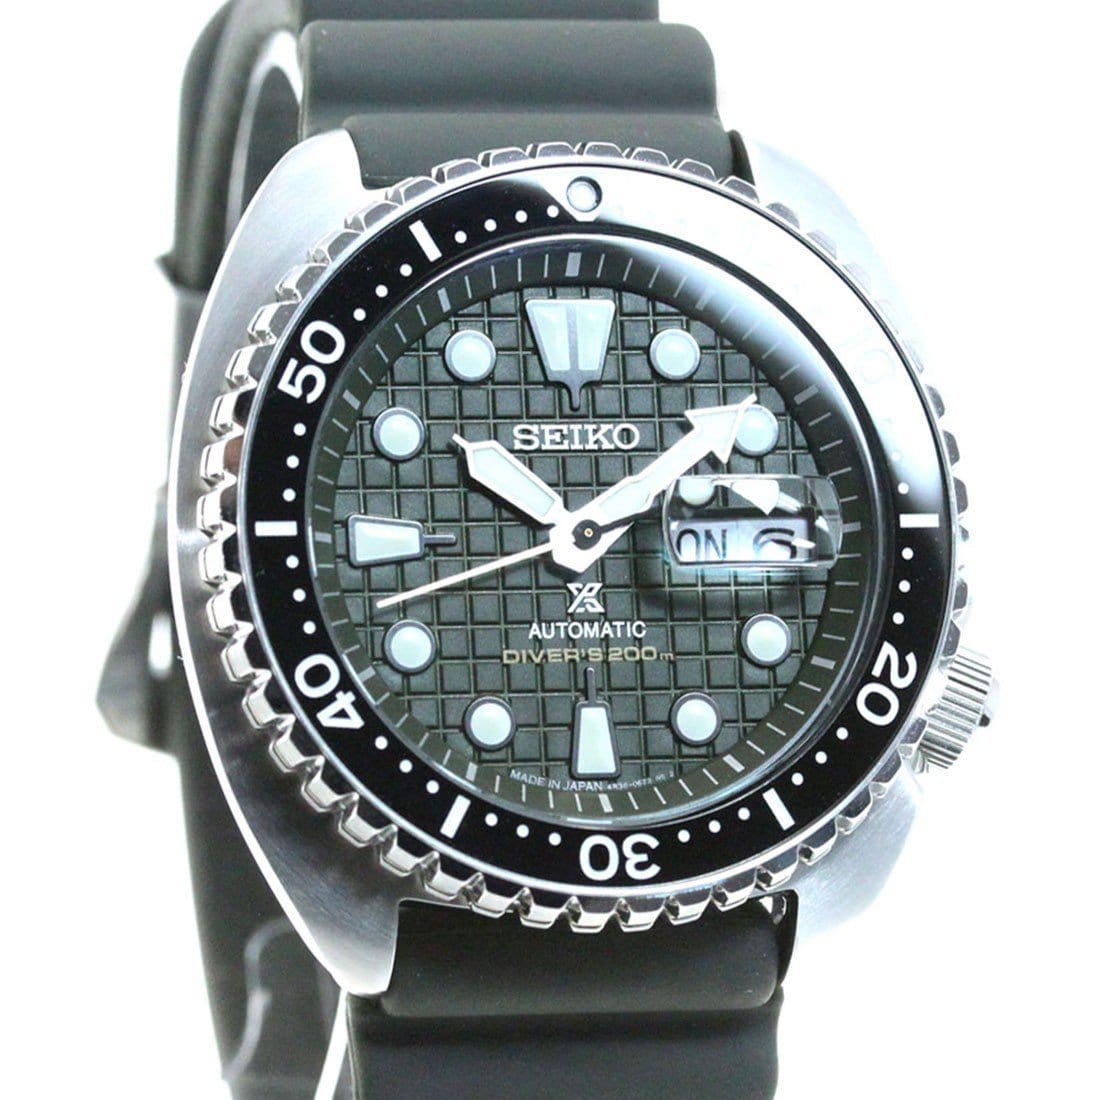 SBDY051 Seiko Prospex Turtle Automatic 200M Male Divers Watch (BACKORDER)